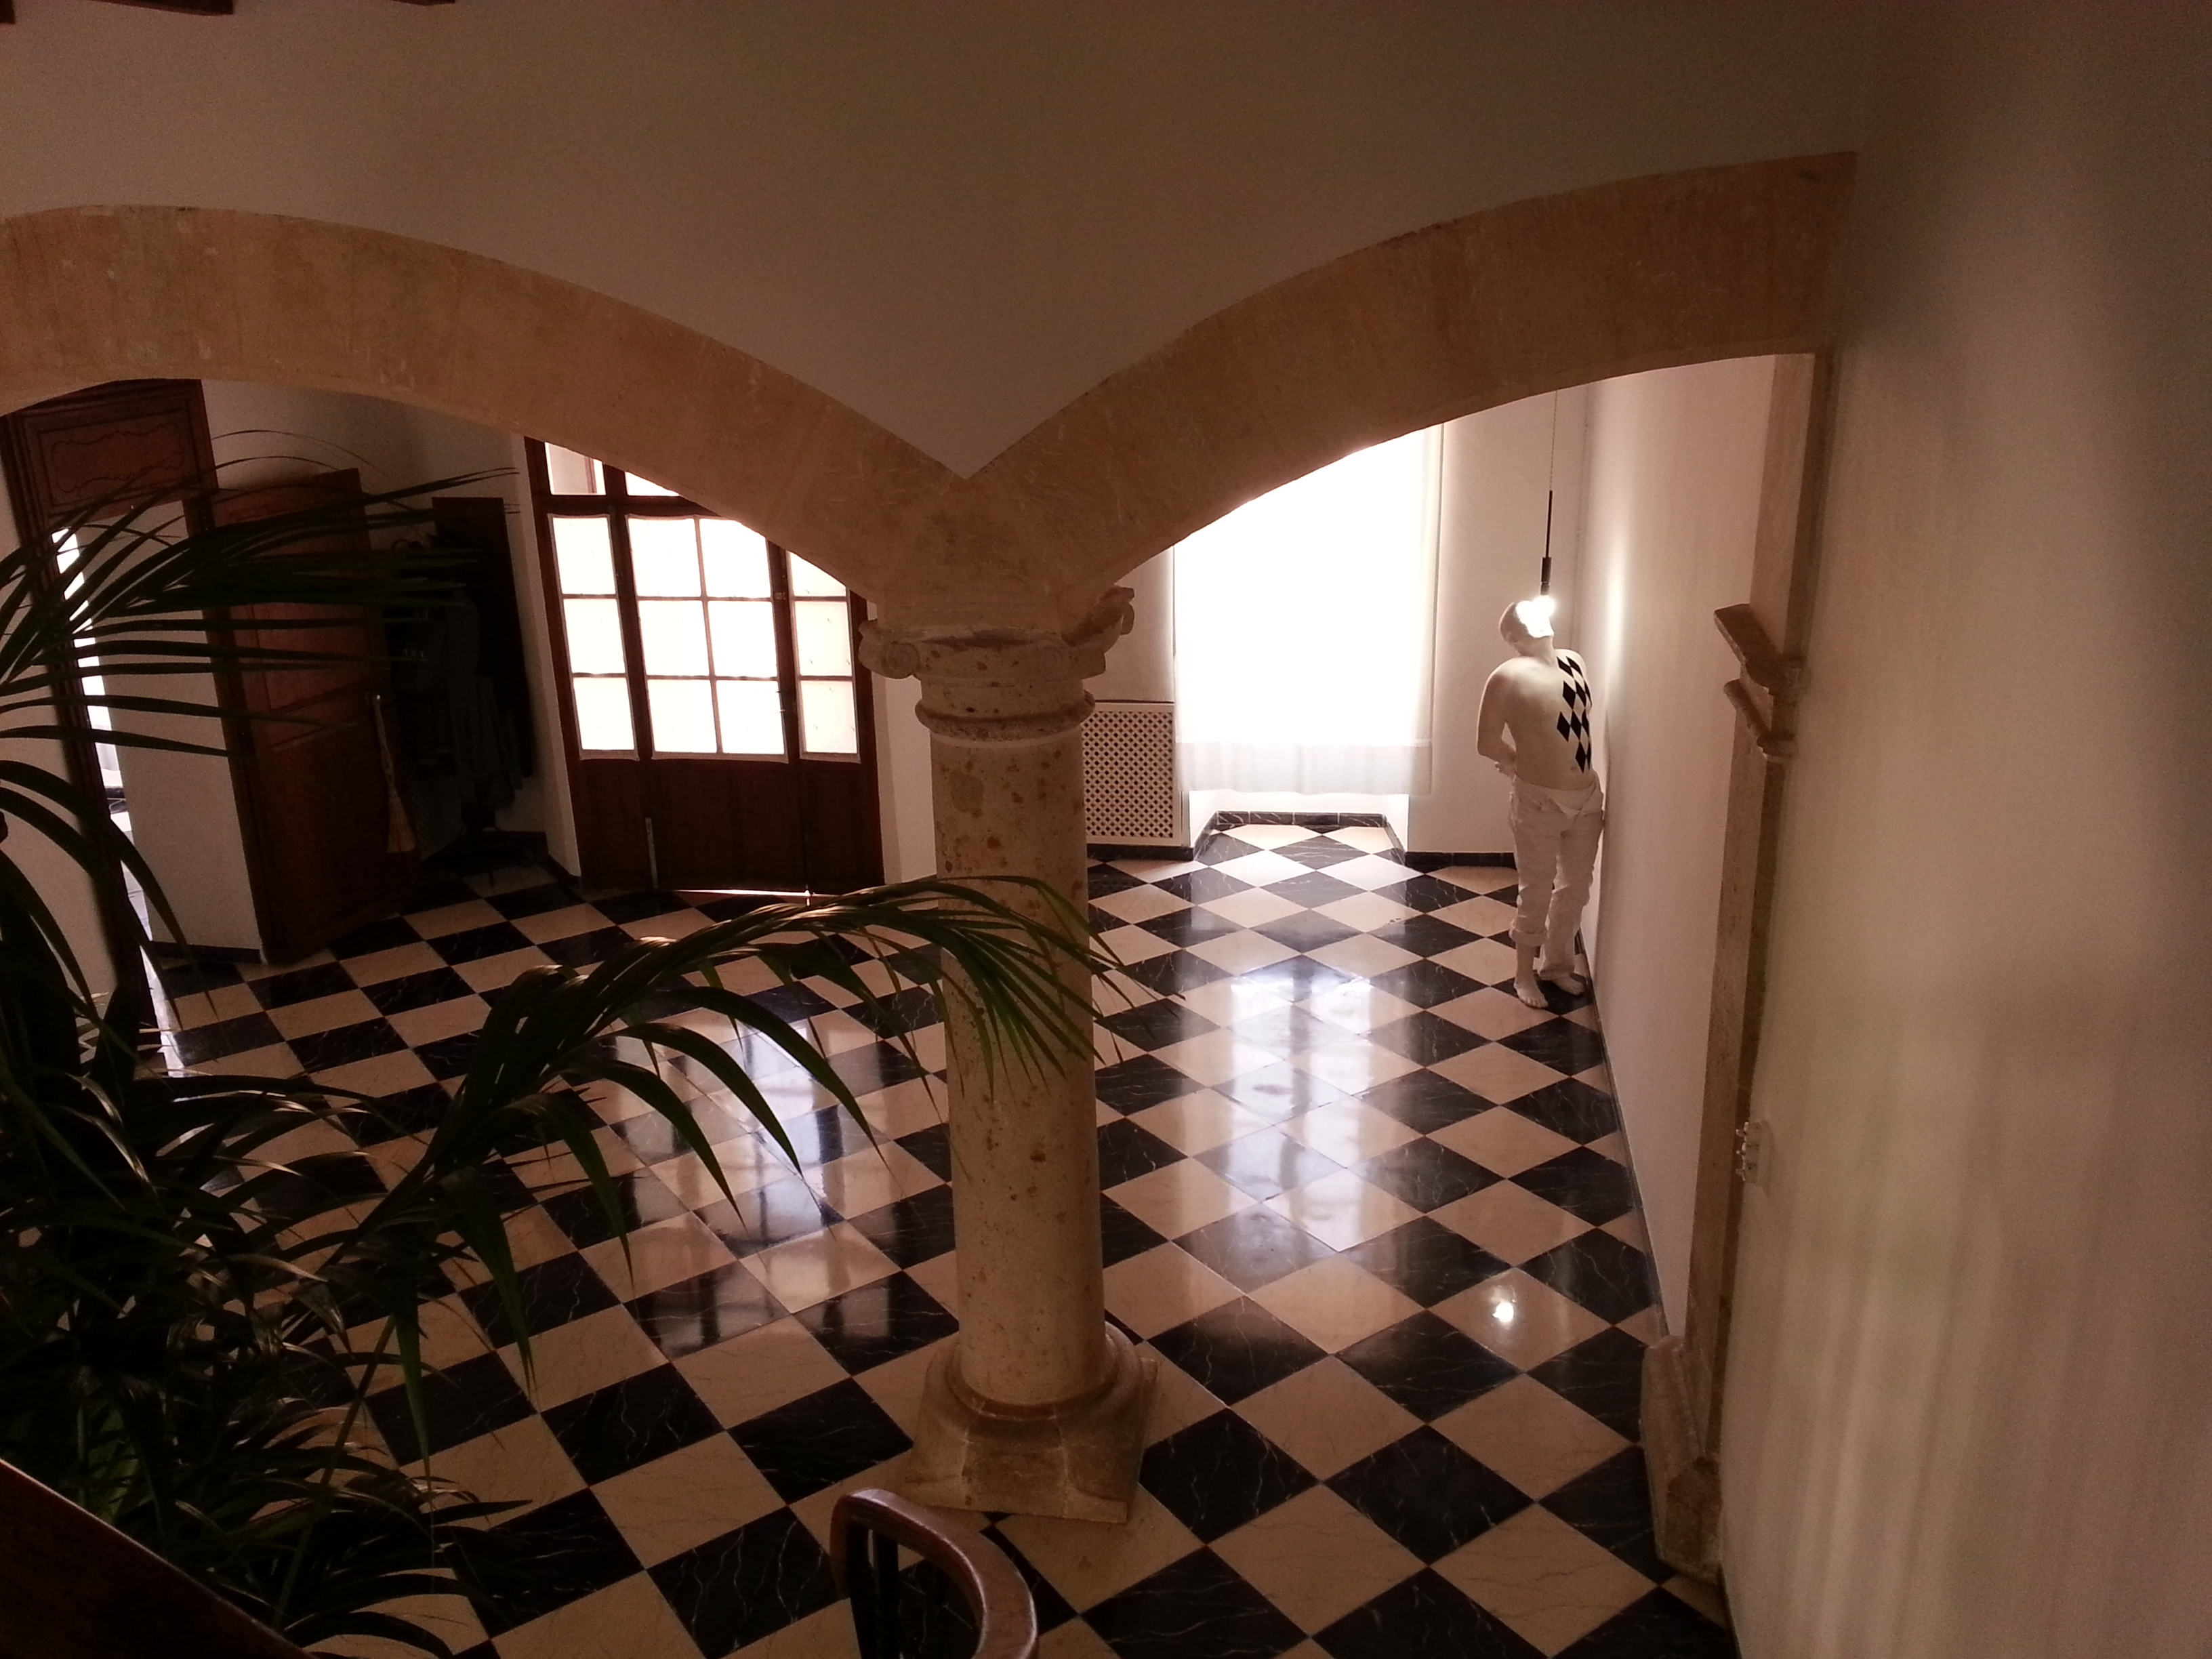 The foyer of Roig's home, with one of the artist's sculptures displayed on the right. Photo: Vesela Sretenovic